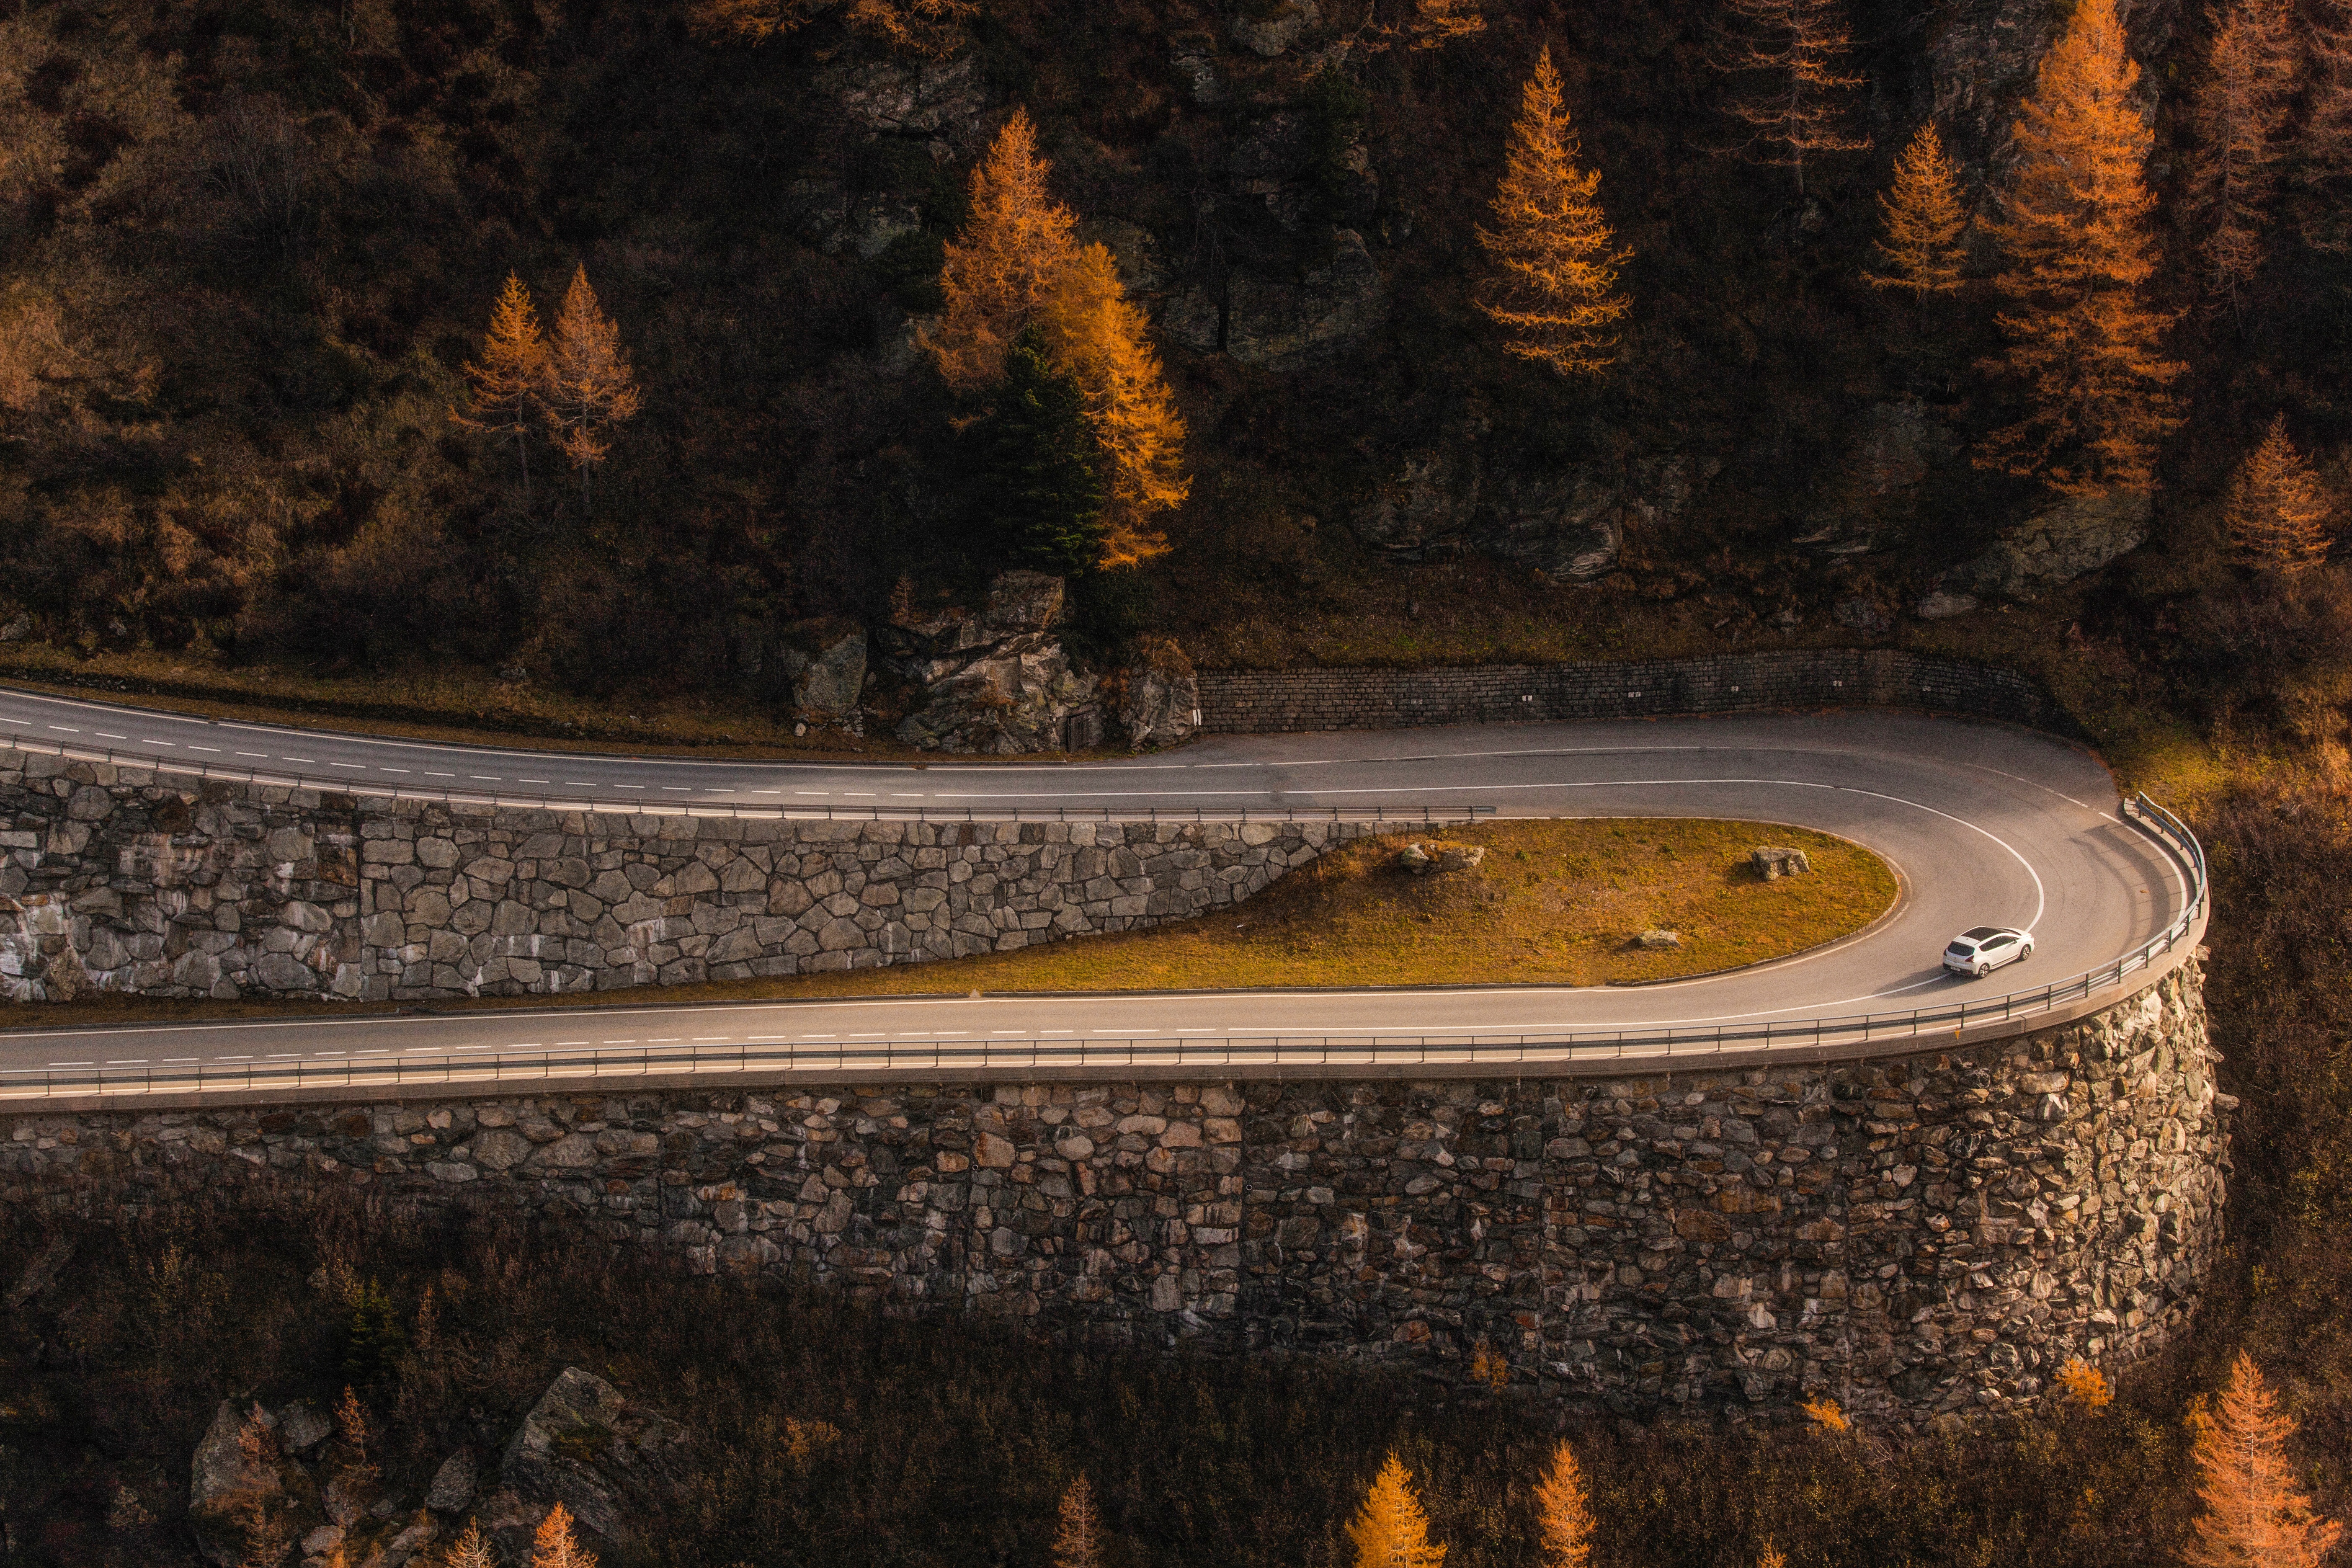 General 5616x3744 forest fall road car mountain pass mountains trees stones landscape Switzerland pine trees hairpin turns